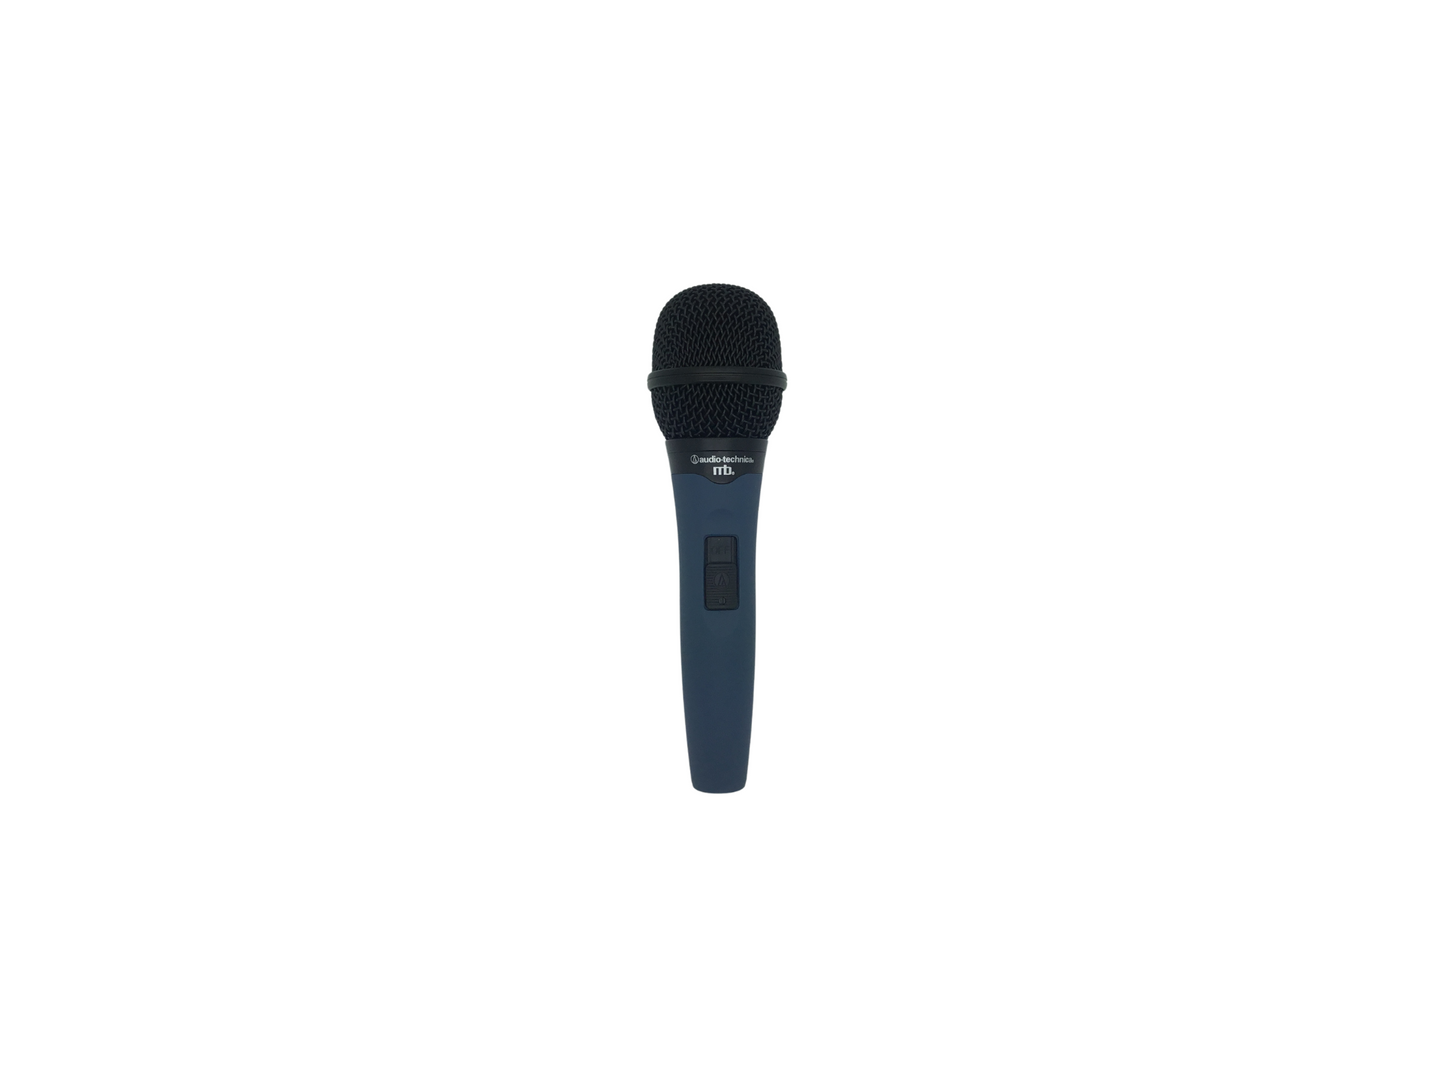 MB3K Handheld Extended Range Vocal Switched Microphone - Blue and Black